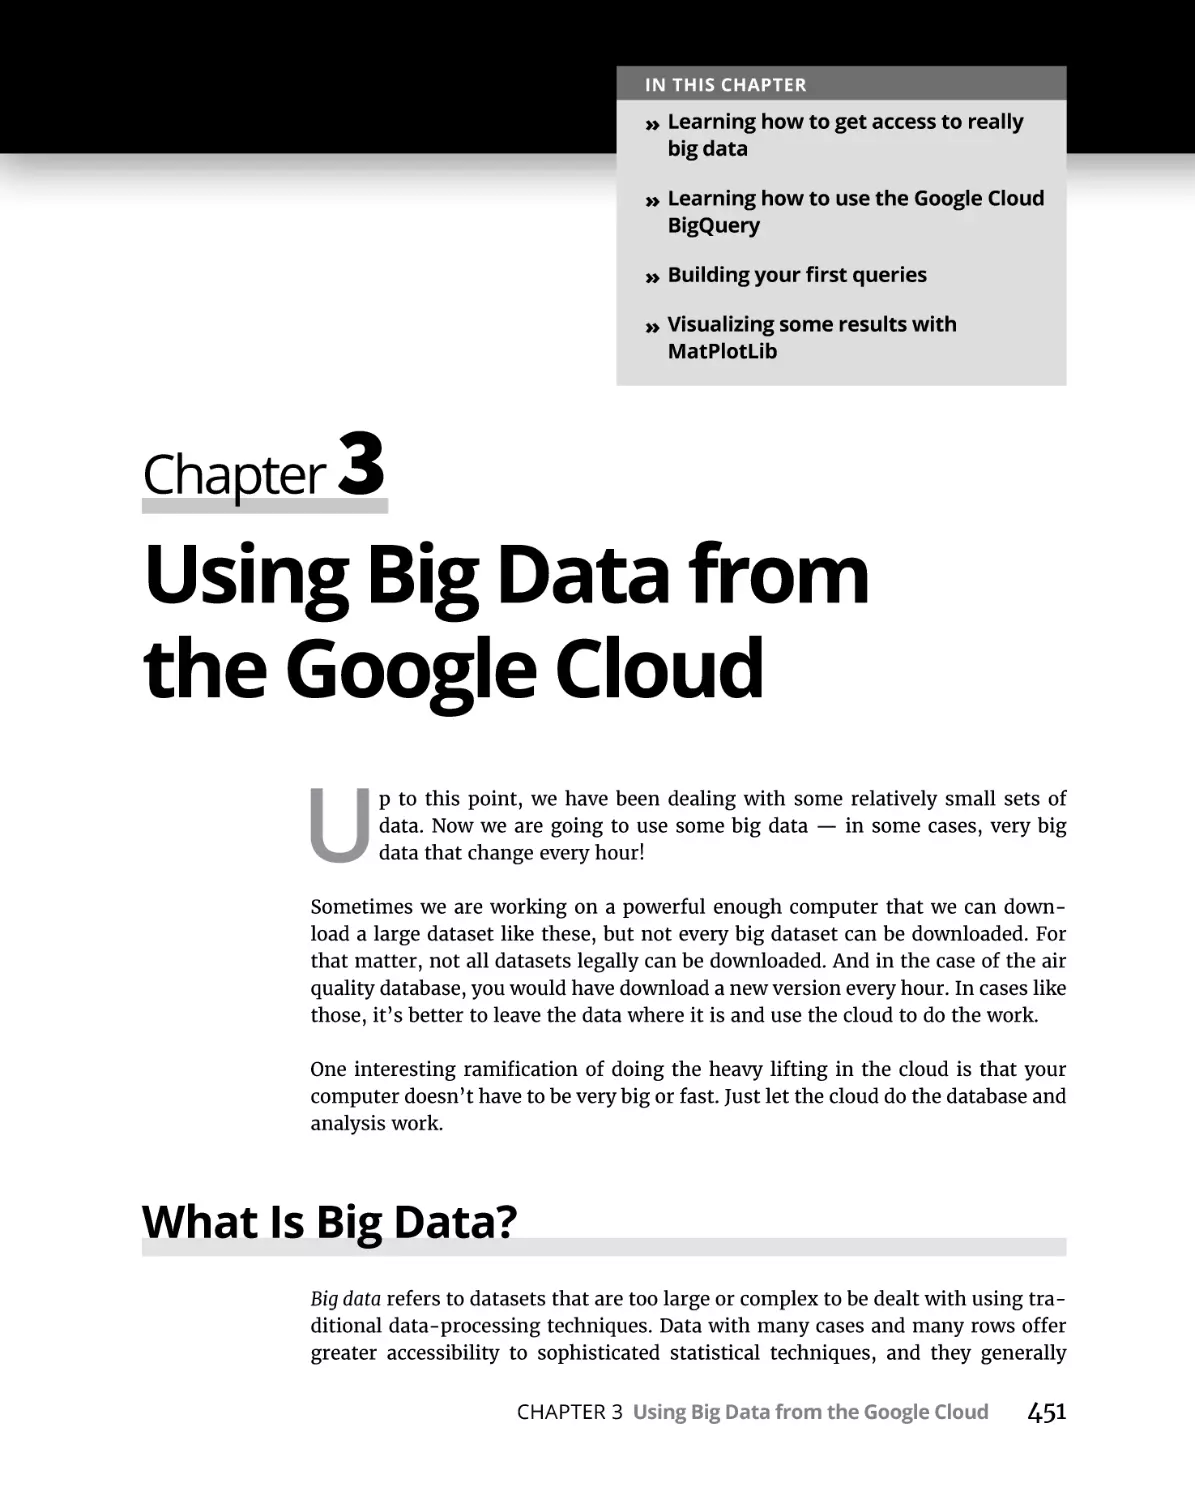 Chapter 3 Using Big Data from the Google Cloud
What Is Big Data?